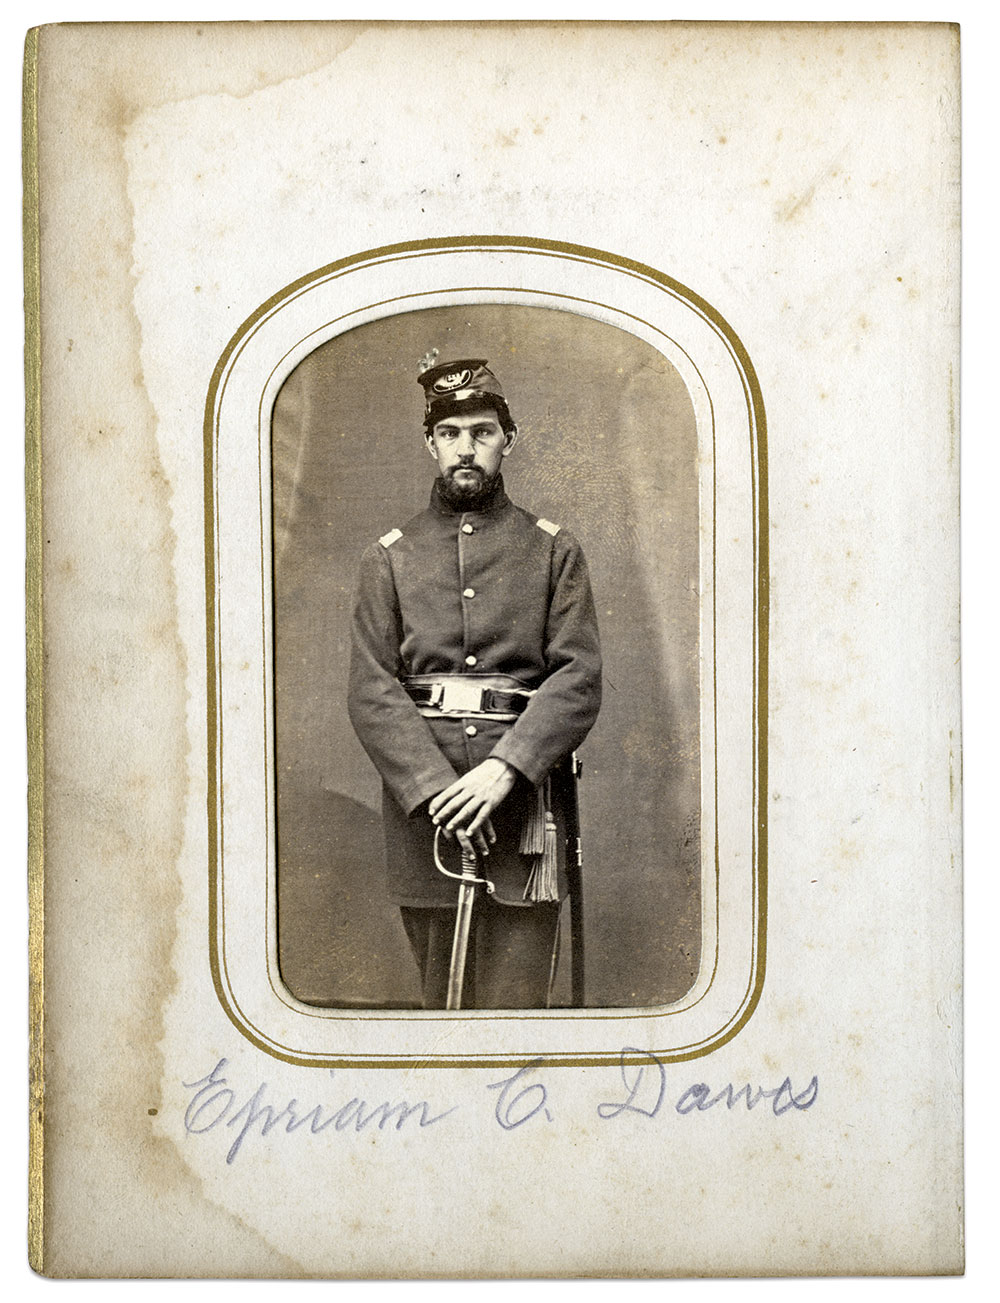 Dawes, pictured prior to his wounding at the Battle of Dallas. Courtesy of Marietta College Legacy Library.